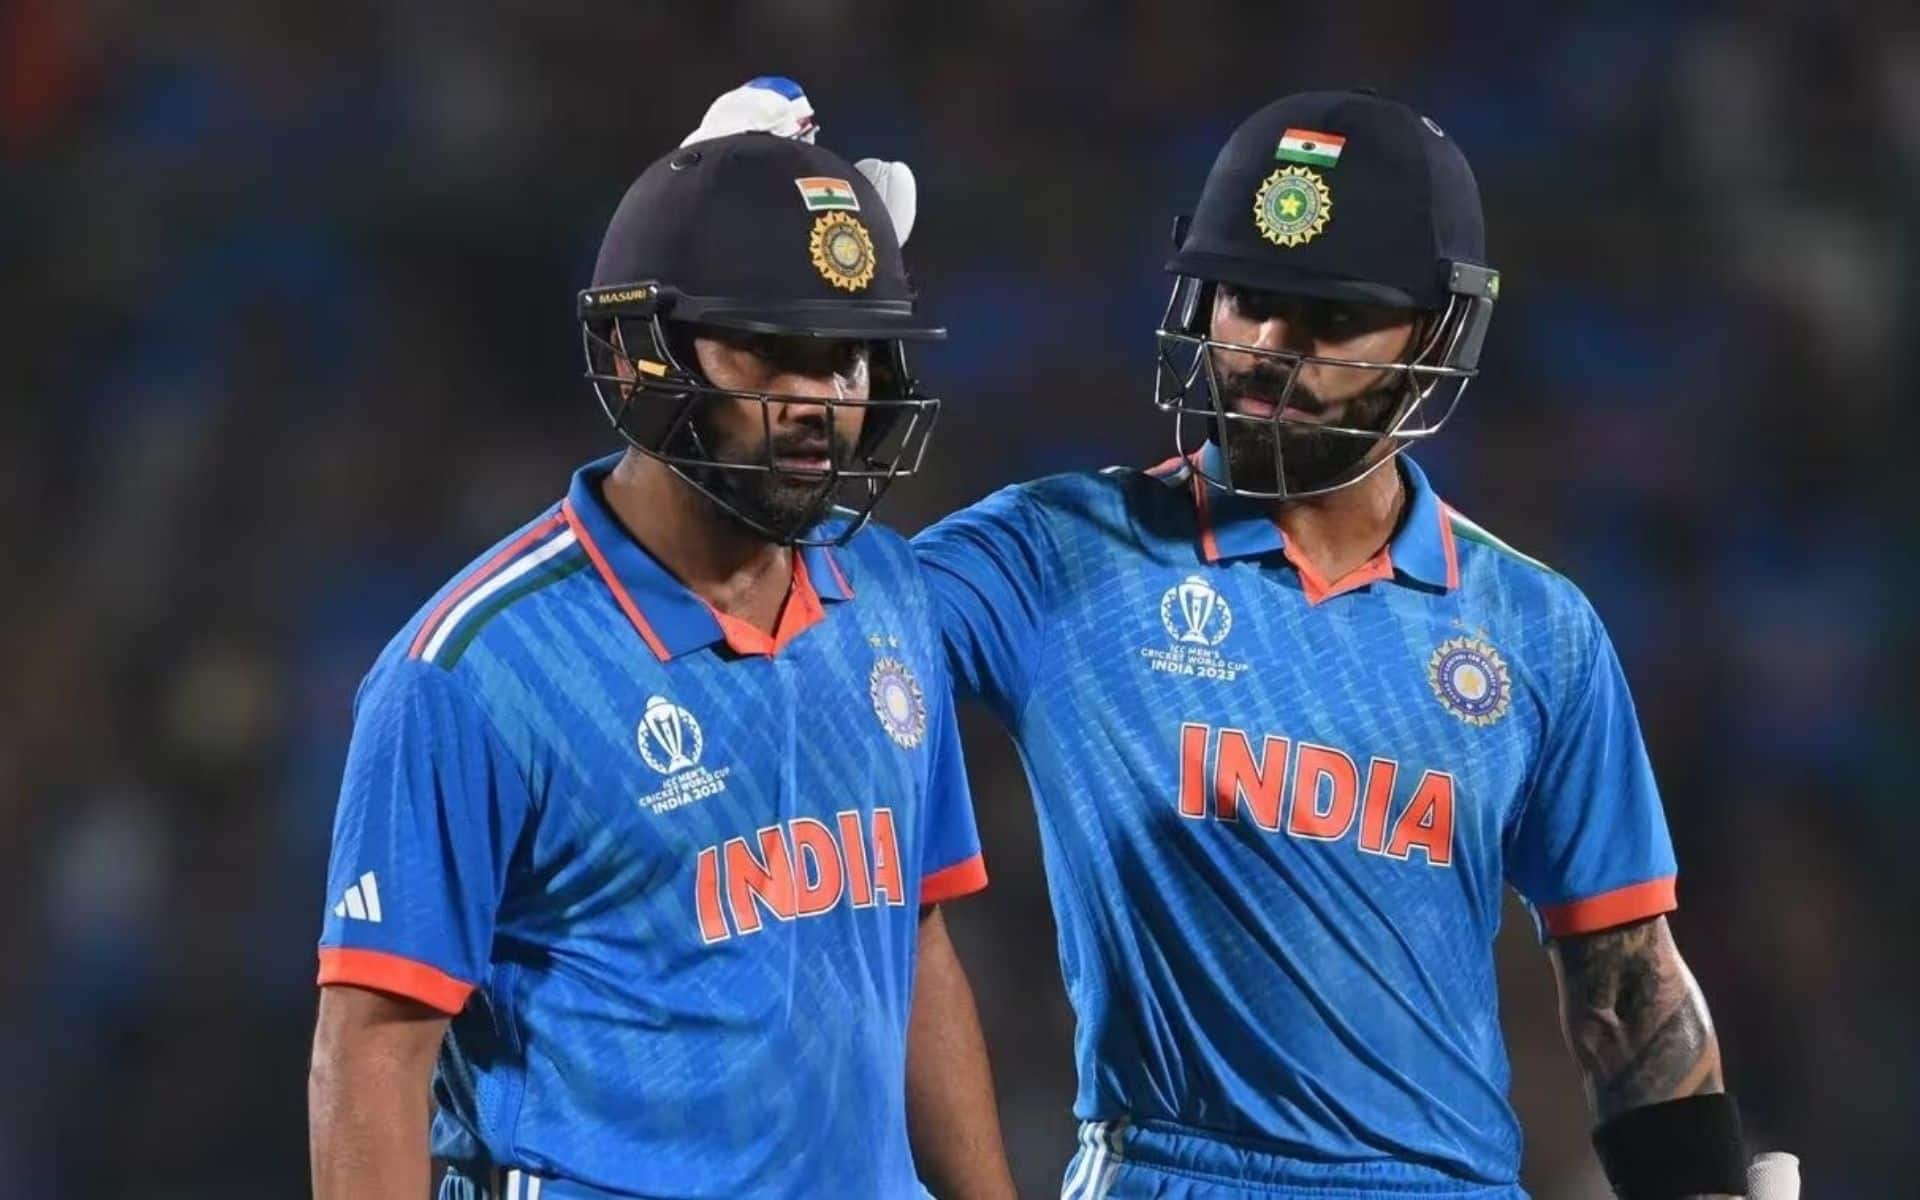 India to face Bangladesh in New York for Warm-Up game [x.com]